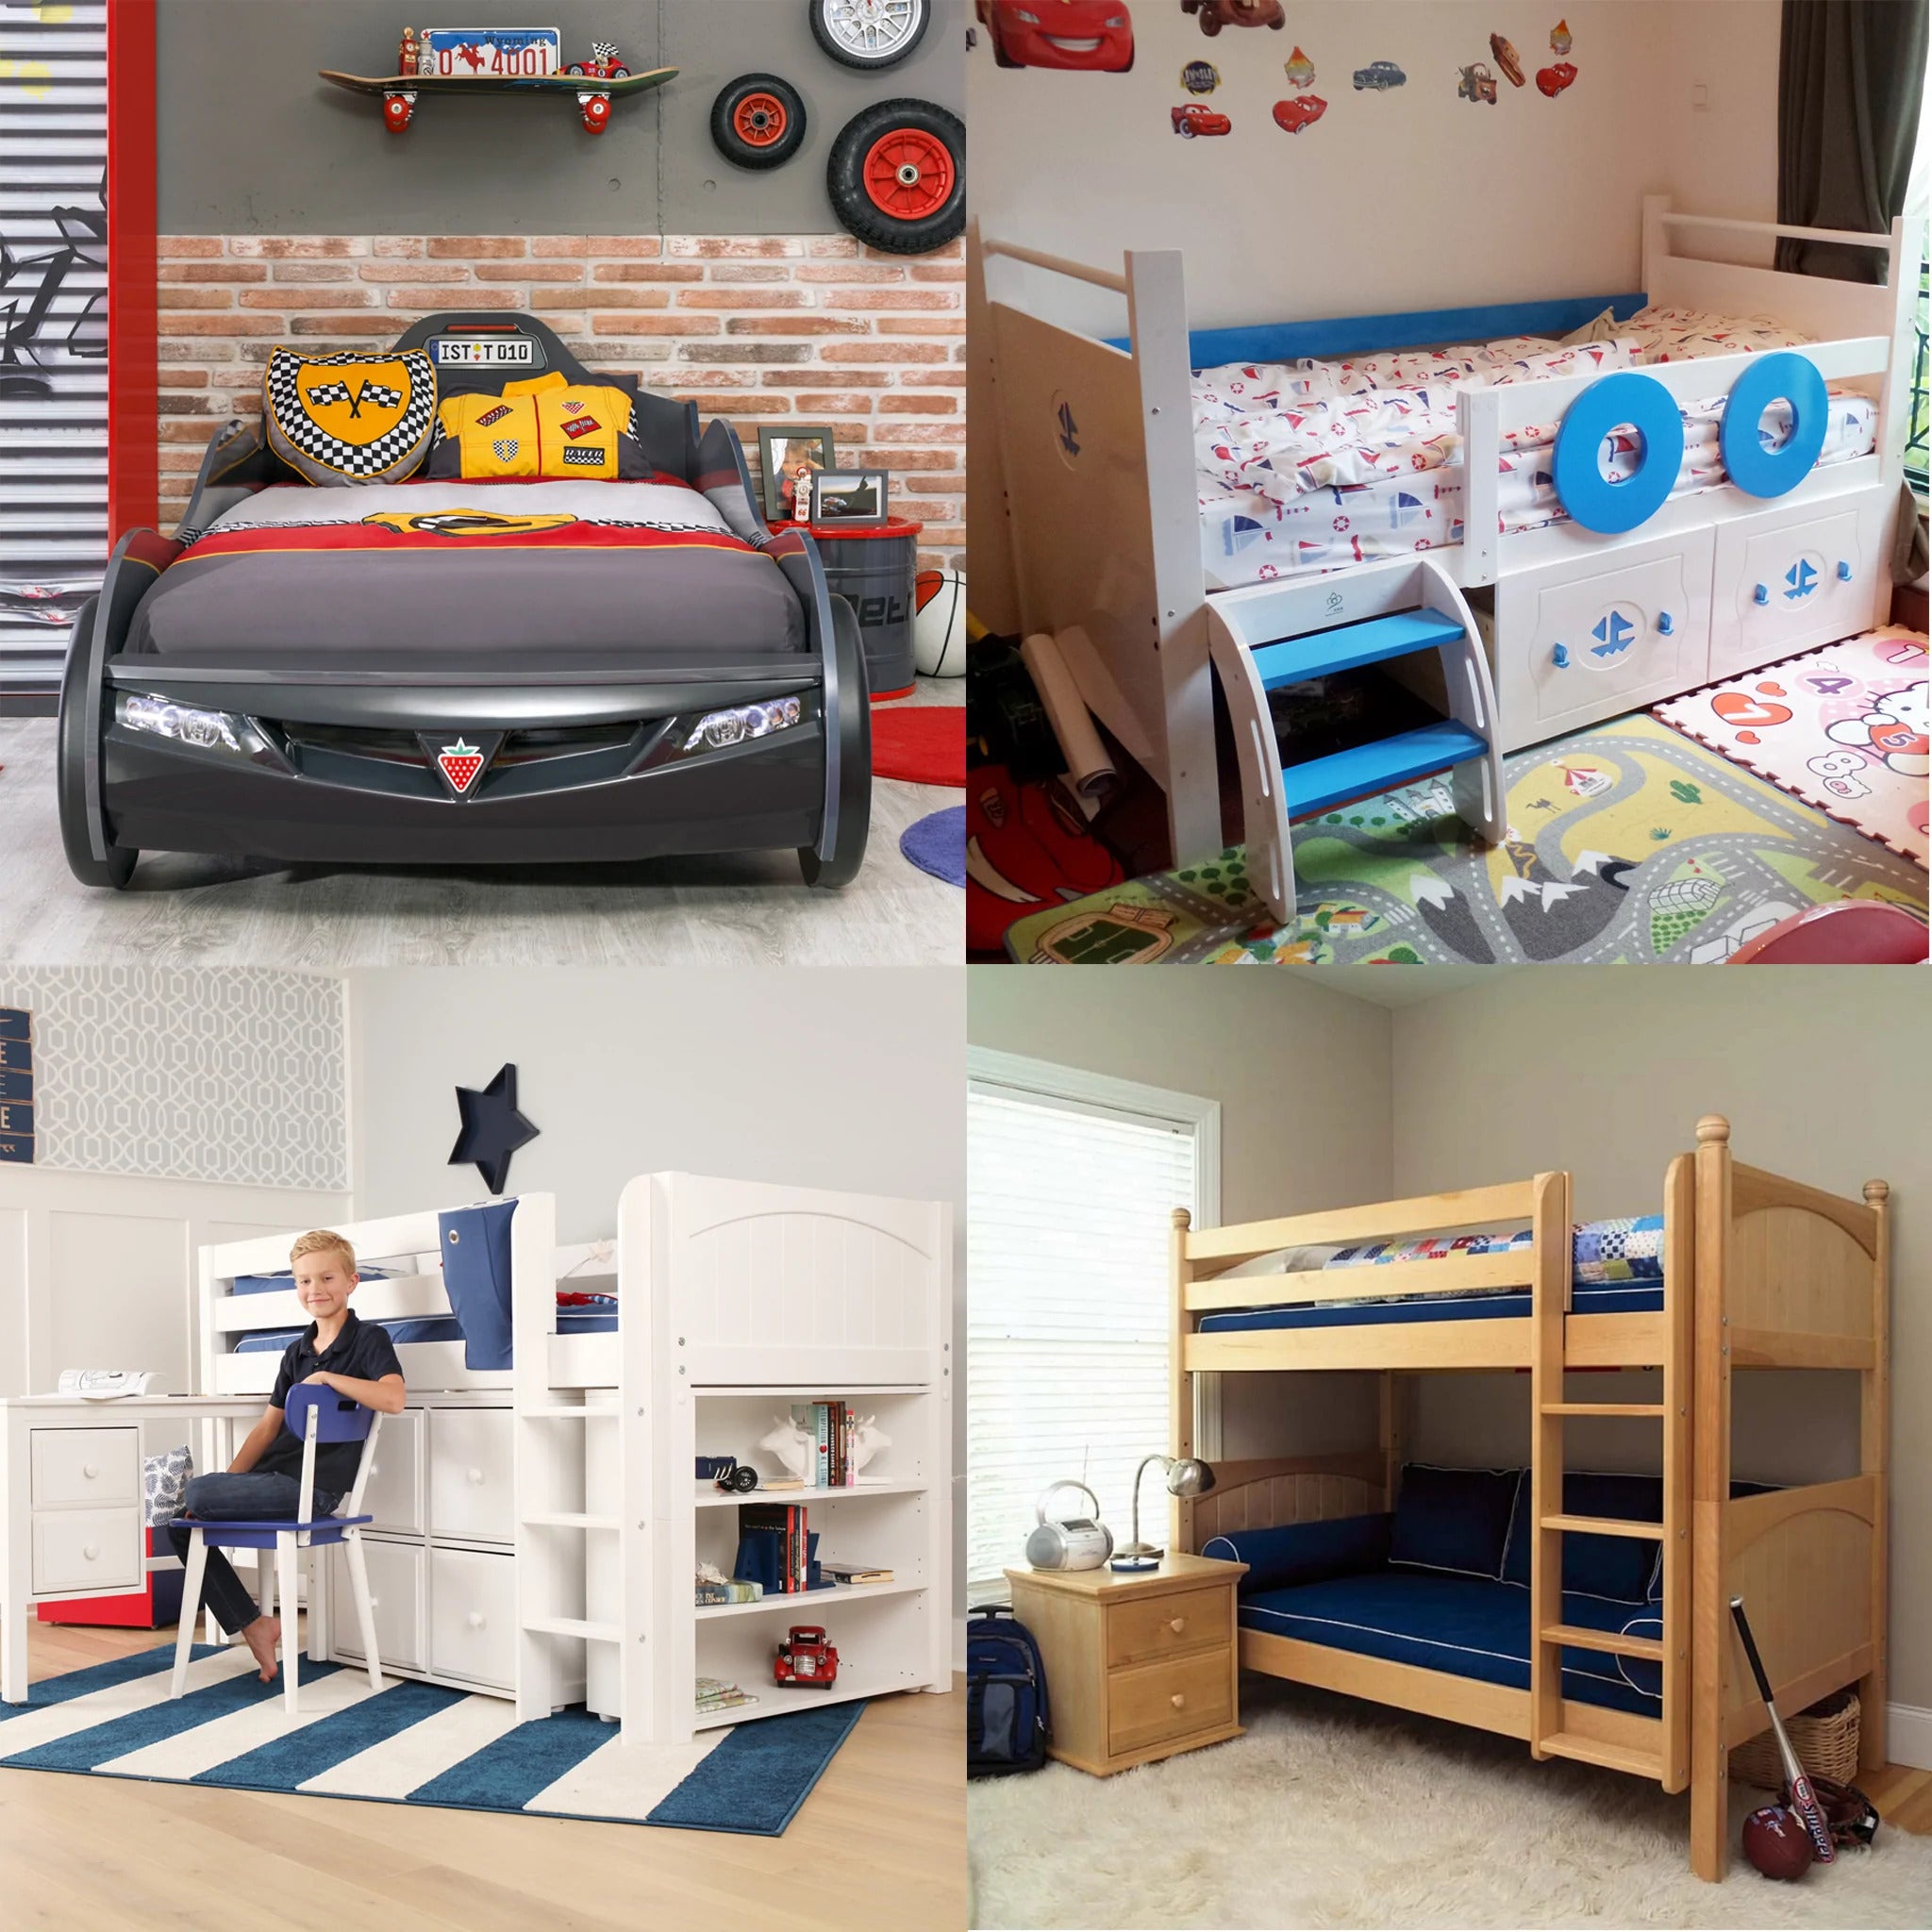 Kids Haven awesome beds